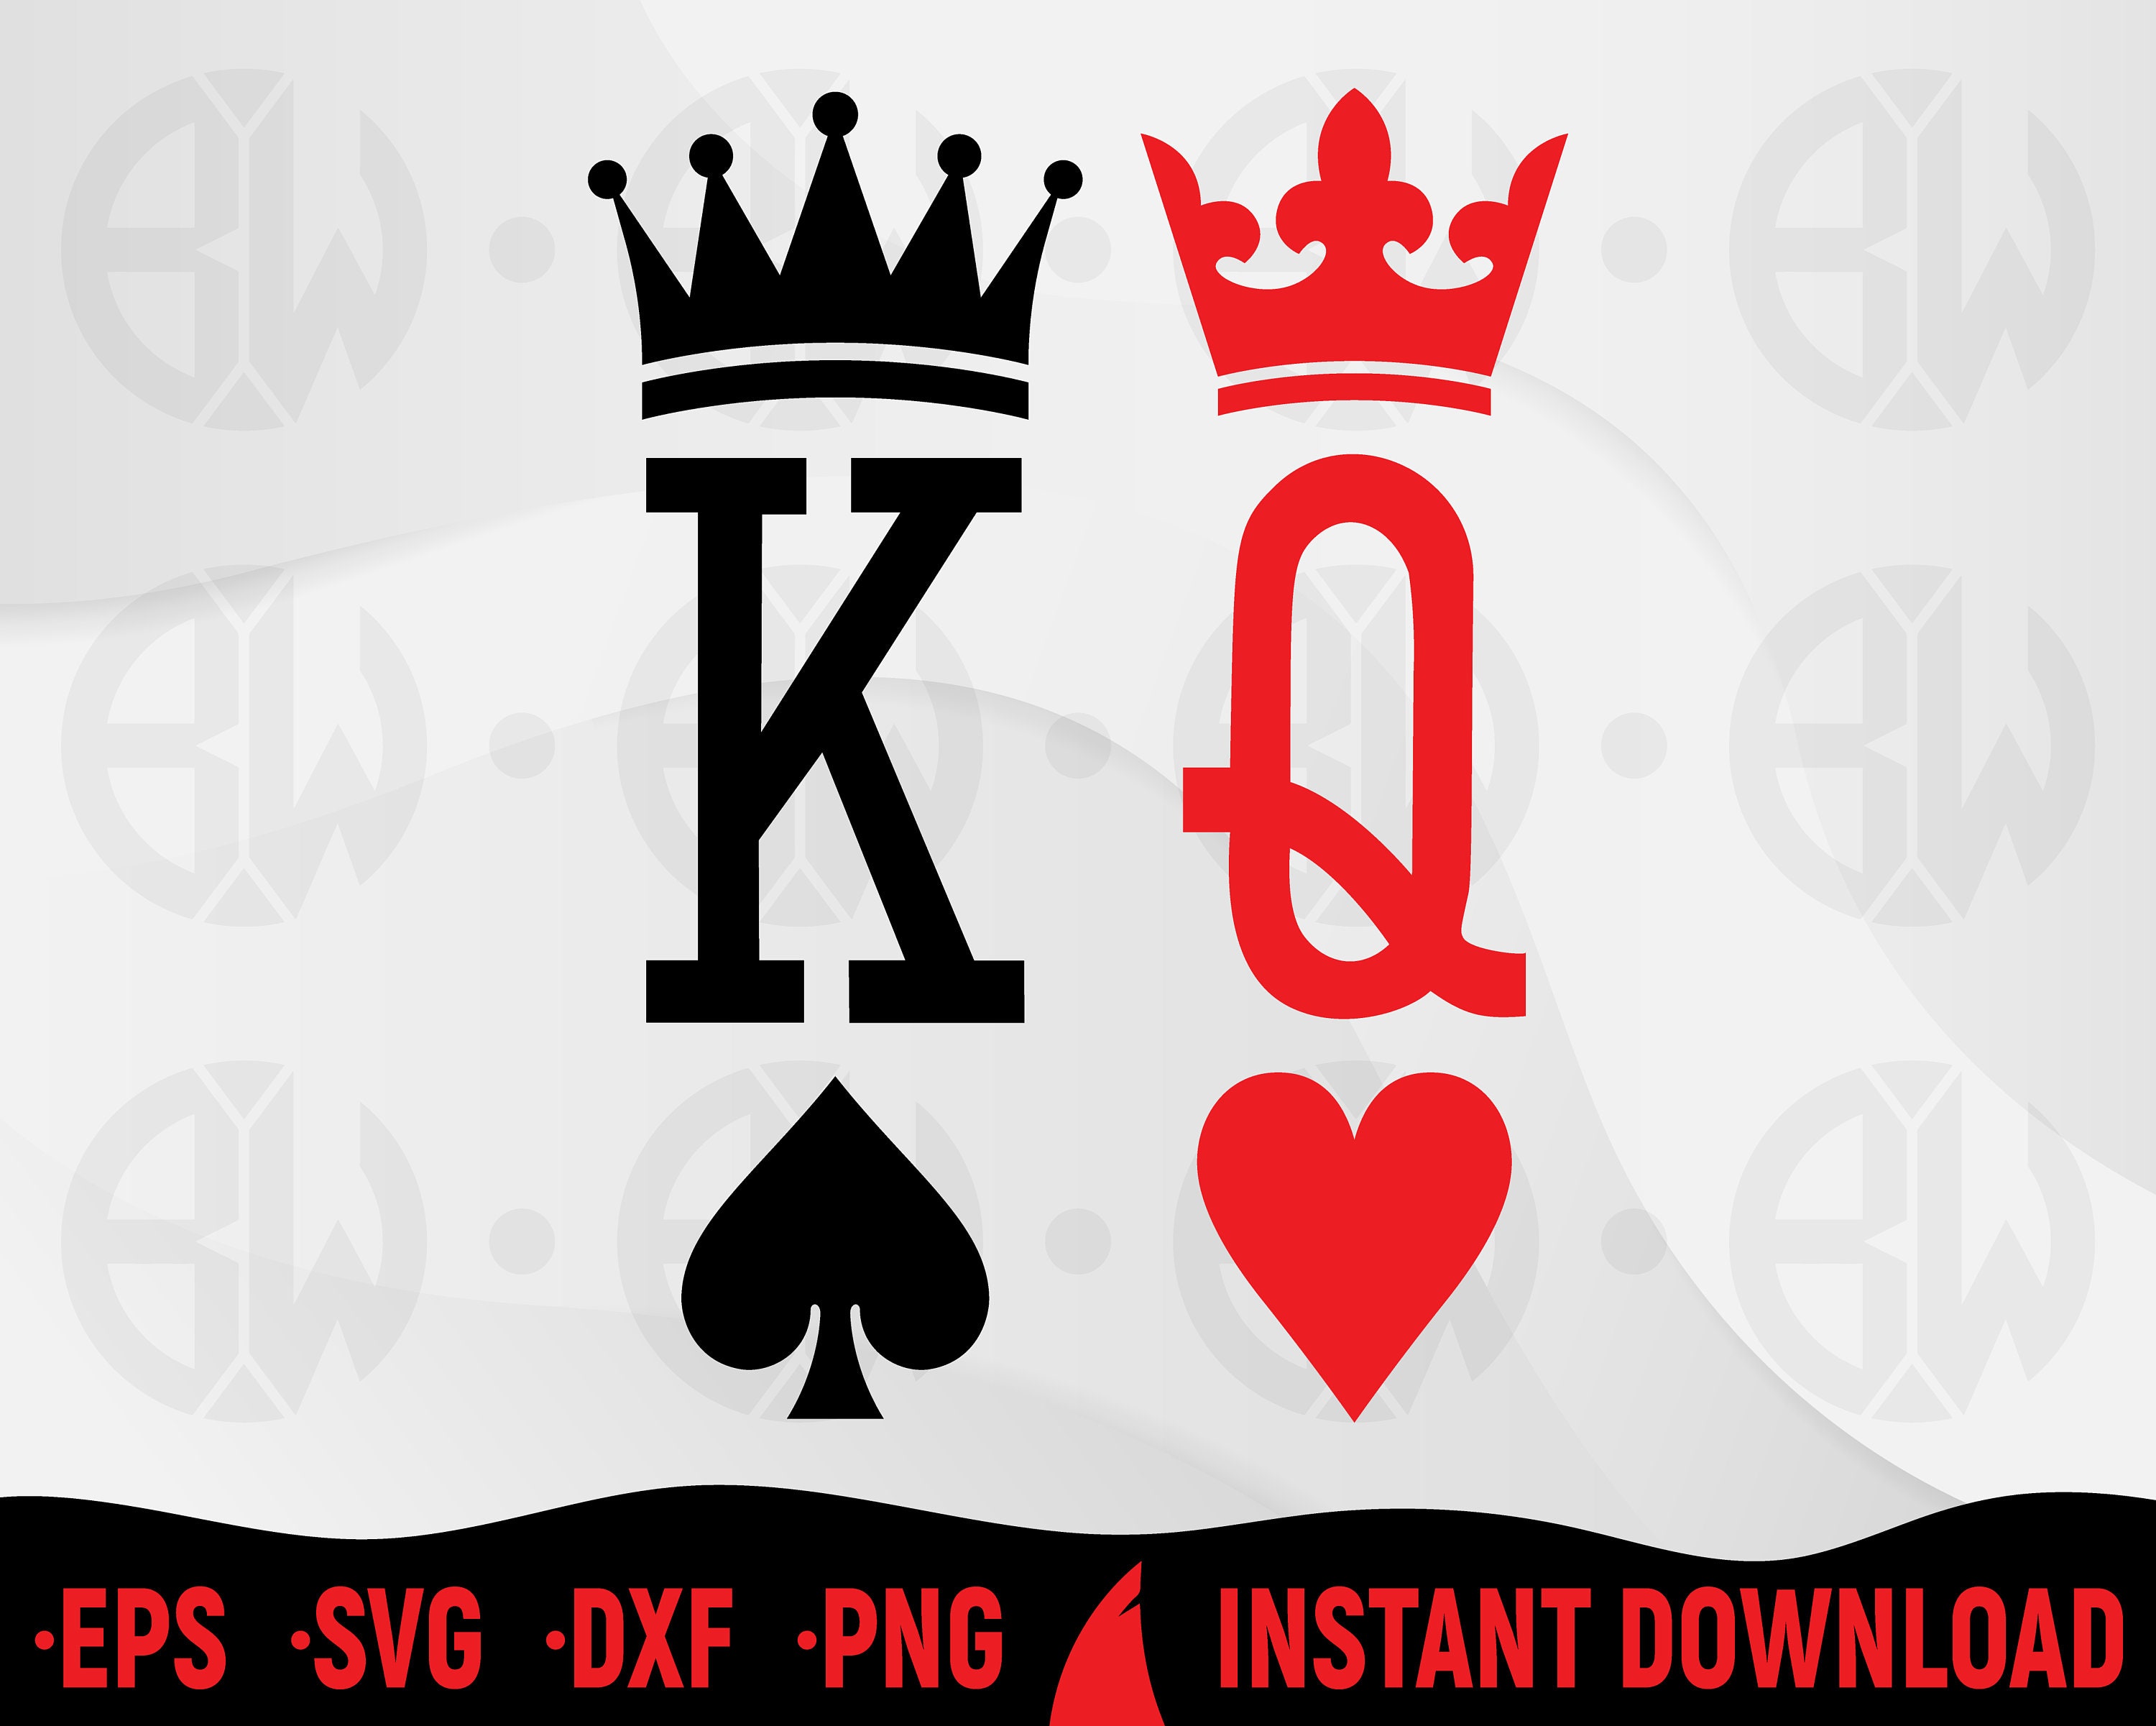 Svg, Svg, - Playing Design Etsy SVG, Svg, Norway and Png, Cutting Cards Queen of Spades, Royal Hearts Dxf, Eps, of King King King Svg Queen Files, File,